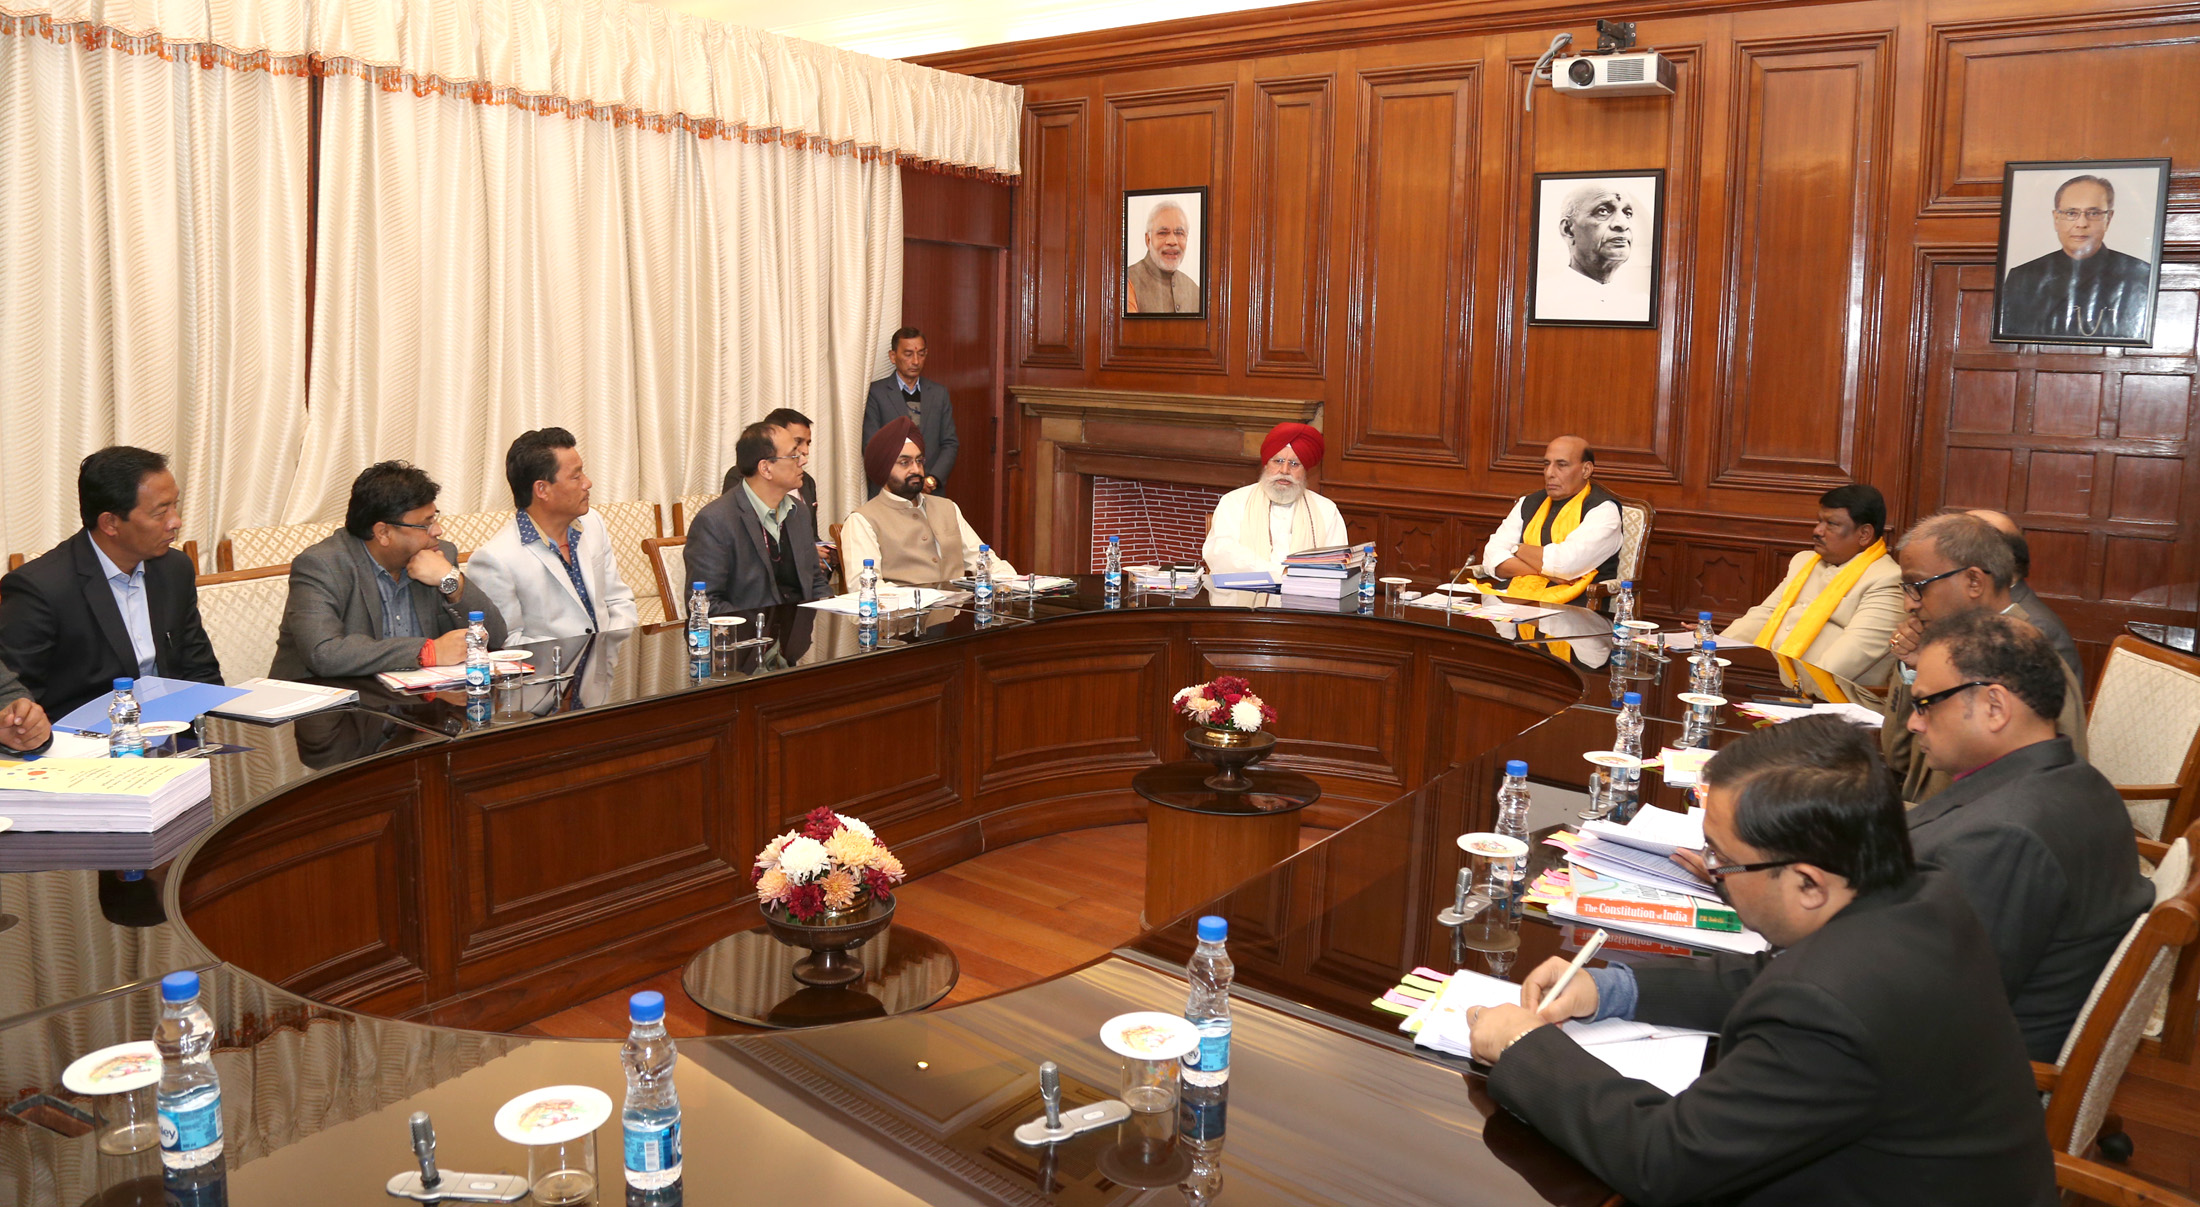 The Union Home Minister, Shri Rajnath Singh chairing a meeting with the delegation of Gorkhaland Territorial Administration (GTA), in New Delhi on December 15, 2016. The Union Minister for Tribal Affairs, Shri Jual Oram, the Minister of State for Agriculture & Farmers Welfare and Parliamentary Affairs, Shri S.S. Ahluwalia and senior officers of the Ministry of Home Affairs, Ministry of Human Resource Development and Ministry of Panchayati Raj are also seen.